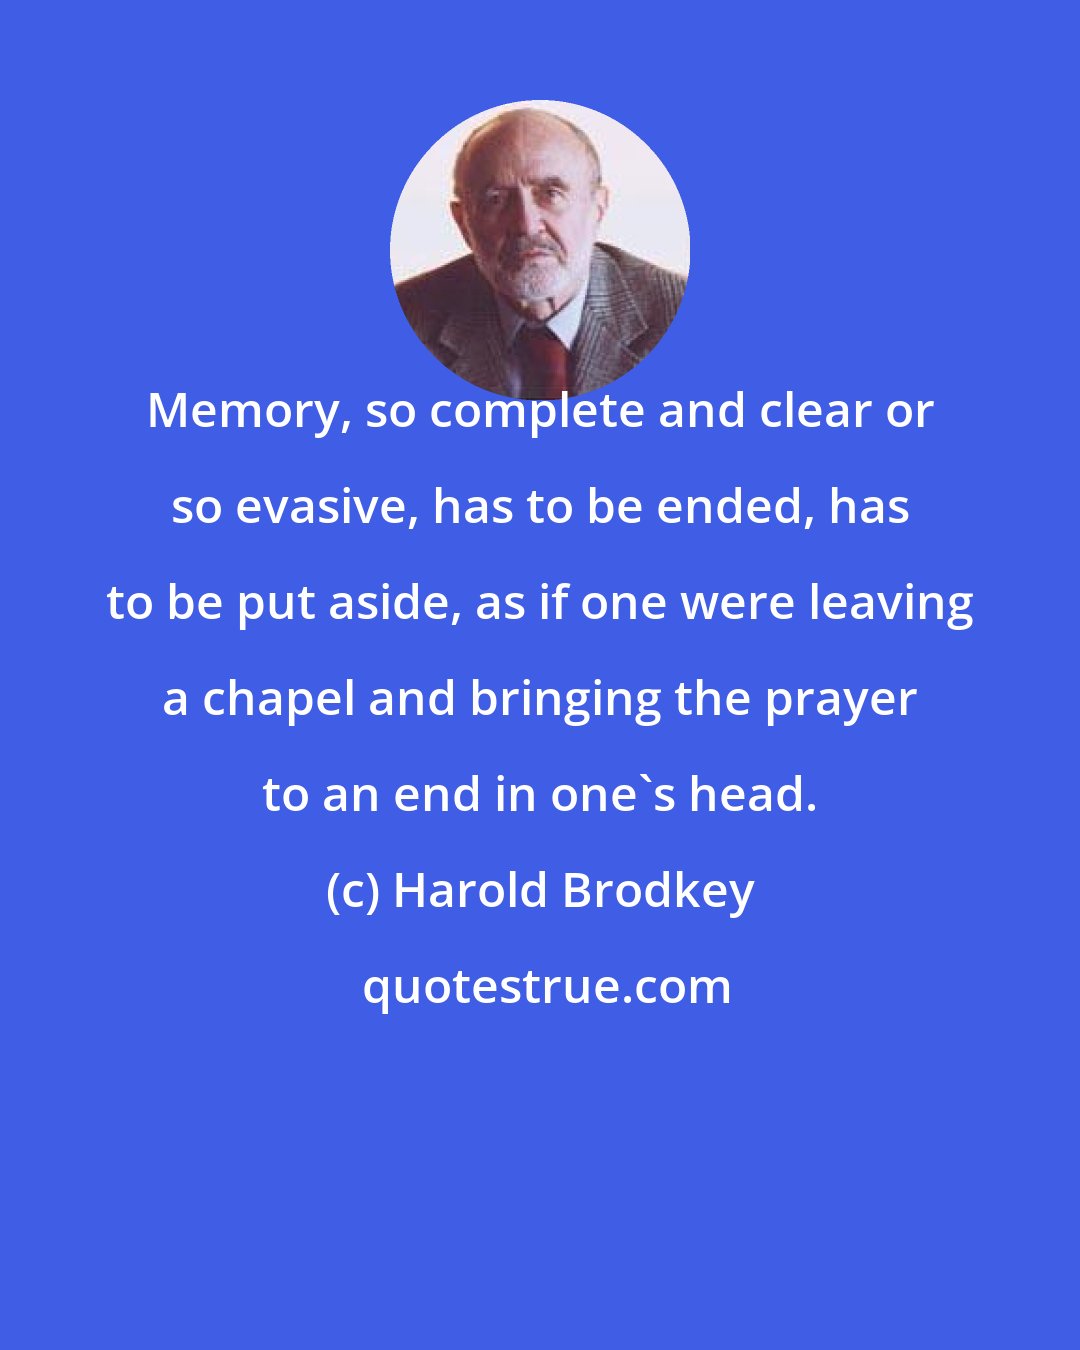 Harold Brodkey: Memory, so complete and clear or so evasive, has to be ended, has to be put aside, as if one were leaving a chapel and bringing the prayer to an end in one's head.